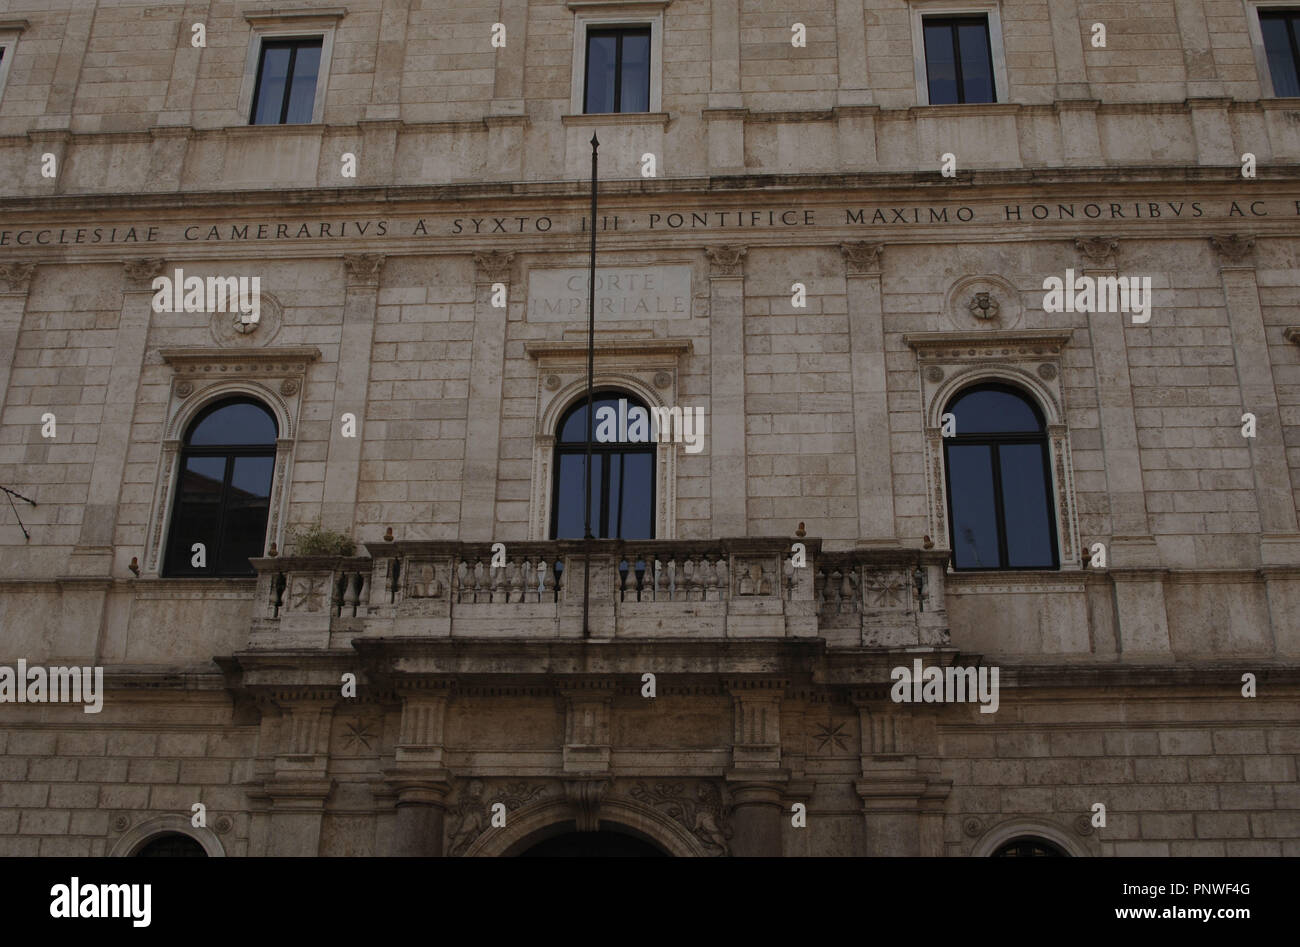 Italy. Rome. Palace of the Chancellery. Renaissence palace built ...